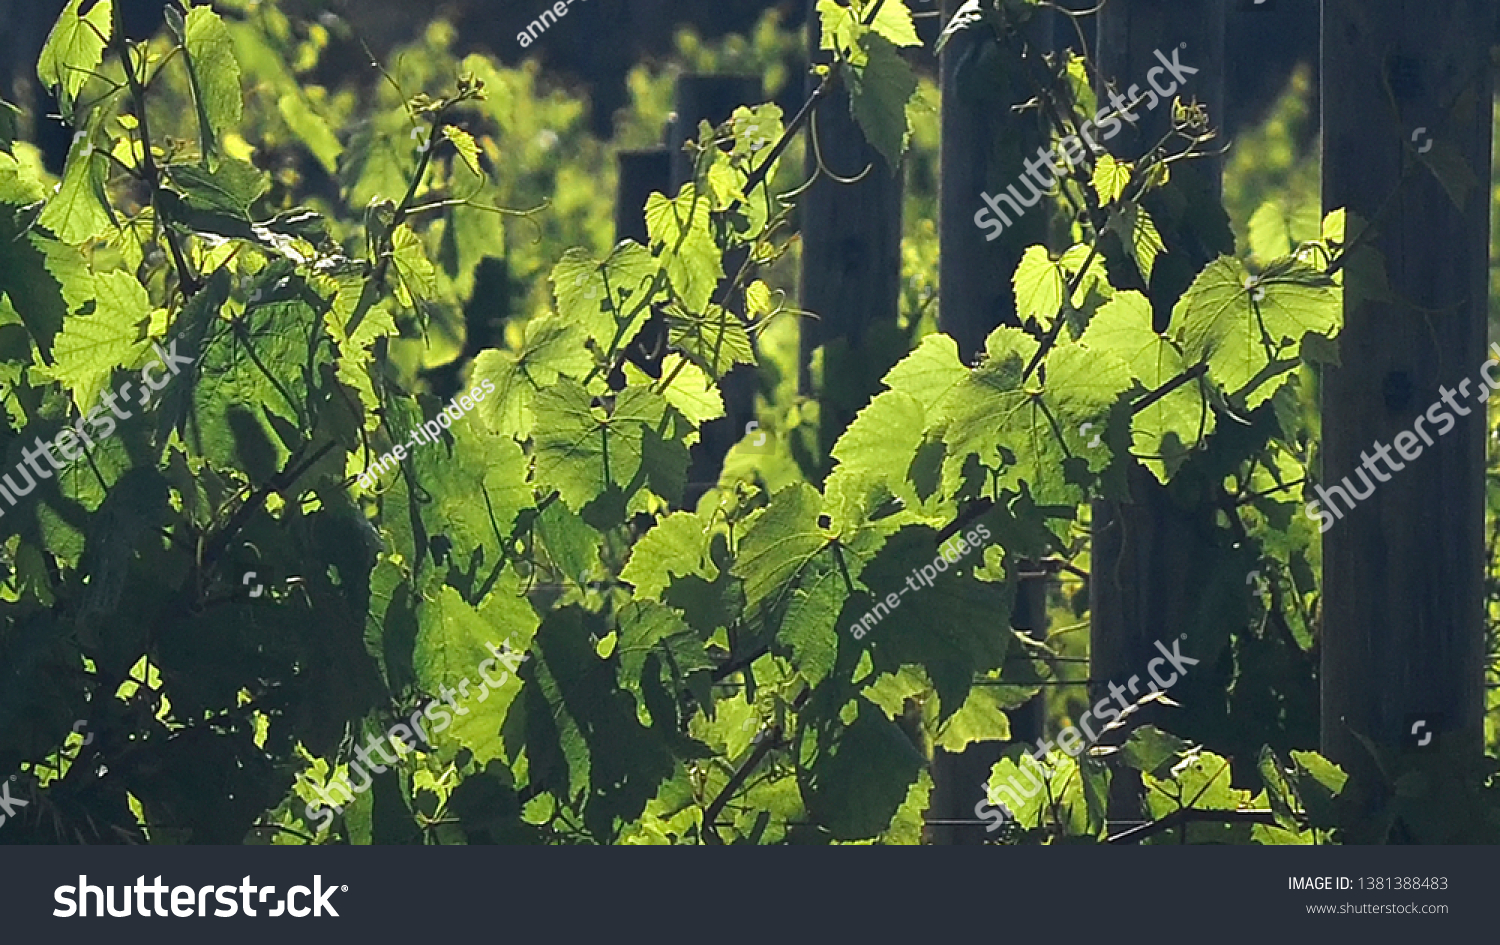  Bright, Contrasty composition of Grape Vines, later afternoon.
Close up, with back light of Grape Vines in the Margaret River Region. #1381388483